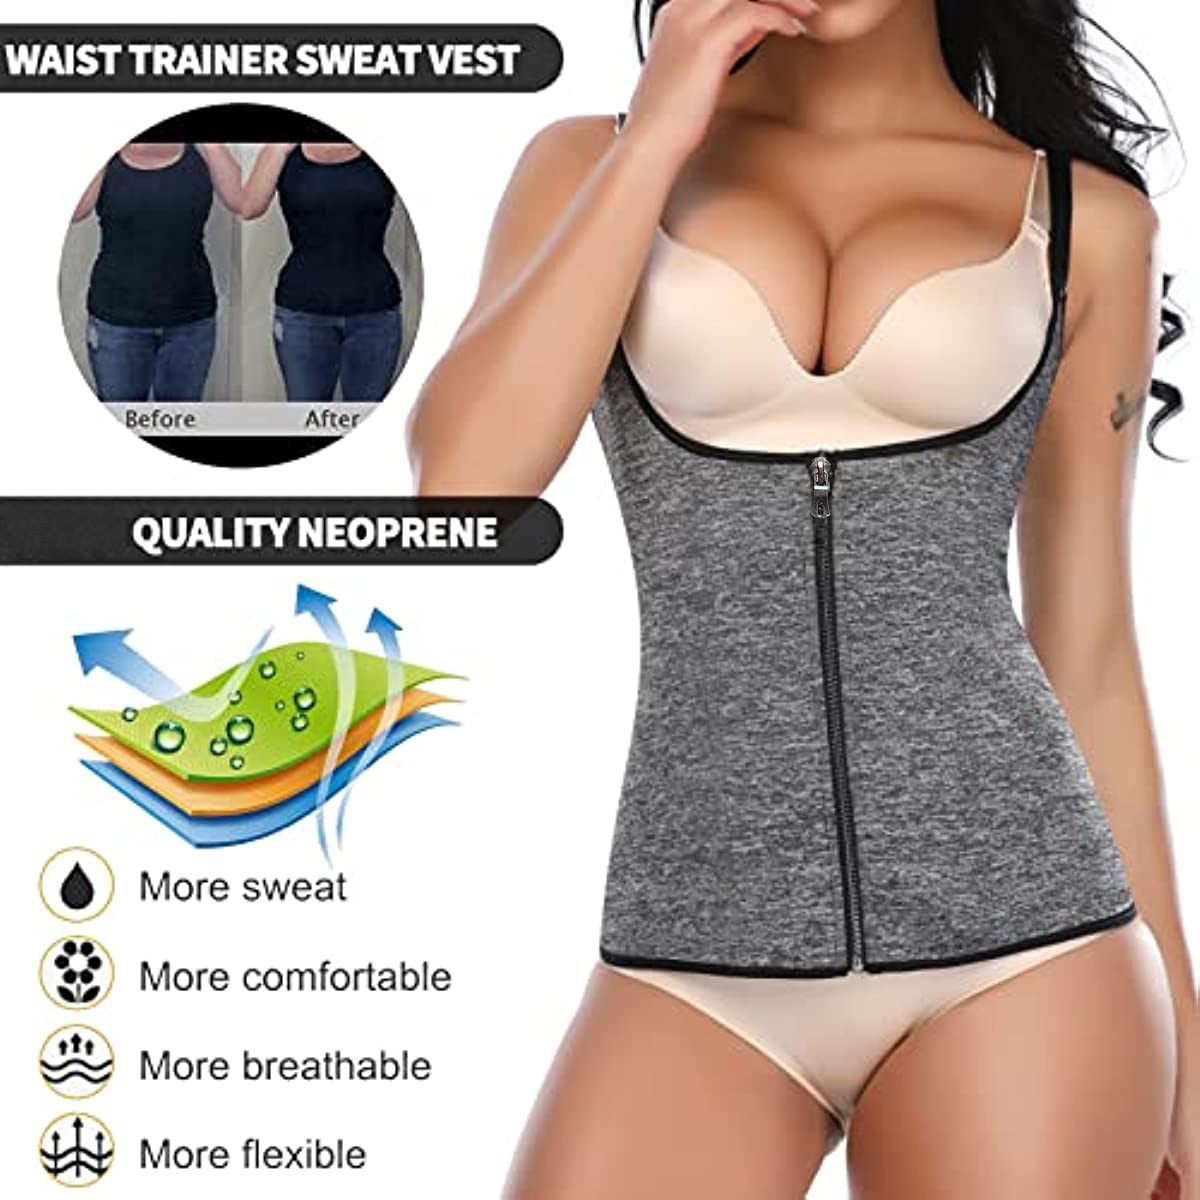  Hioffer Sauna Sweat Vest For Women Workout Tank Top Slimming  Polymer Sauna Suit Waist Trainer Shirt Fitness Body Shaper : Clothing,  Shoes & Jewelry